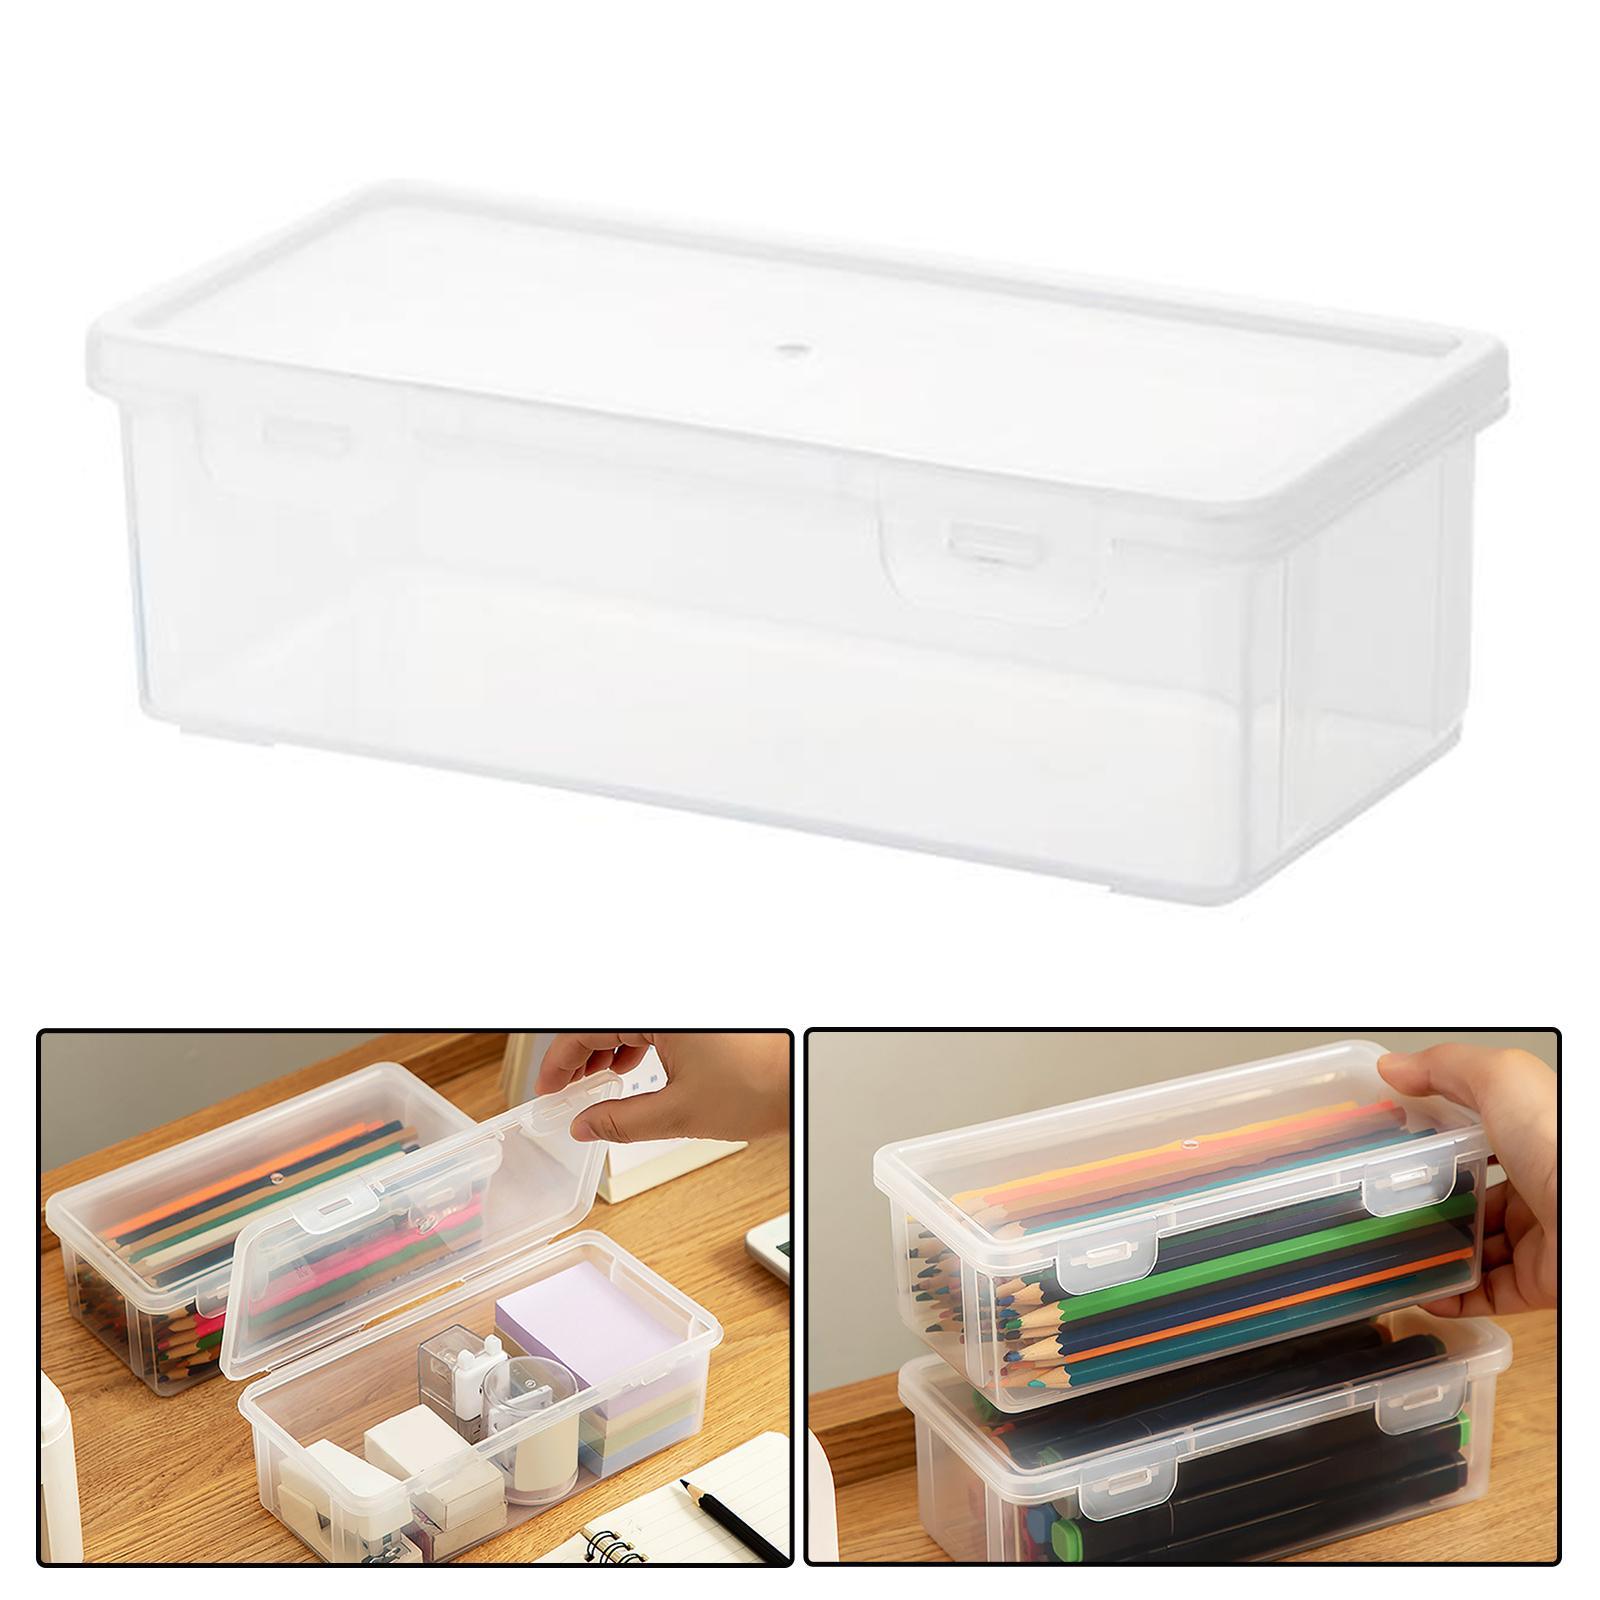 Dustproof Storage Box Clear with Lid, PP Multipurpose Portable Countertop Stackable Holder Organizer Case, for Office Supplies